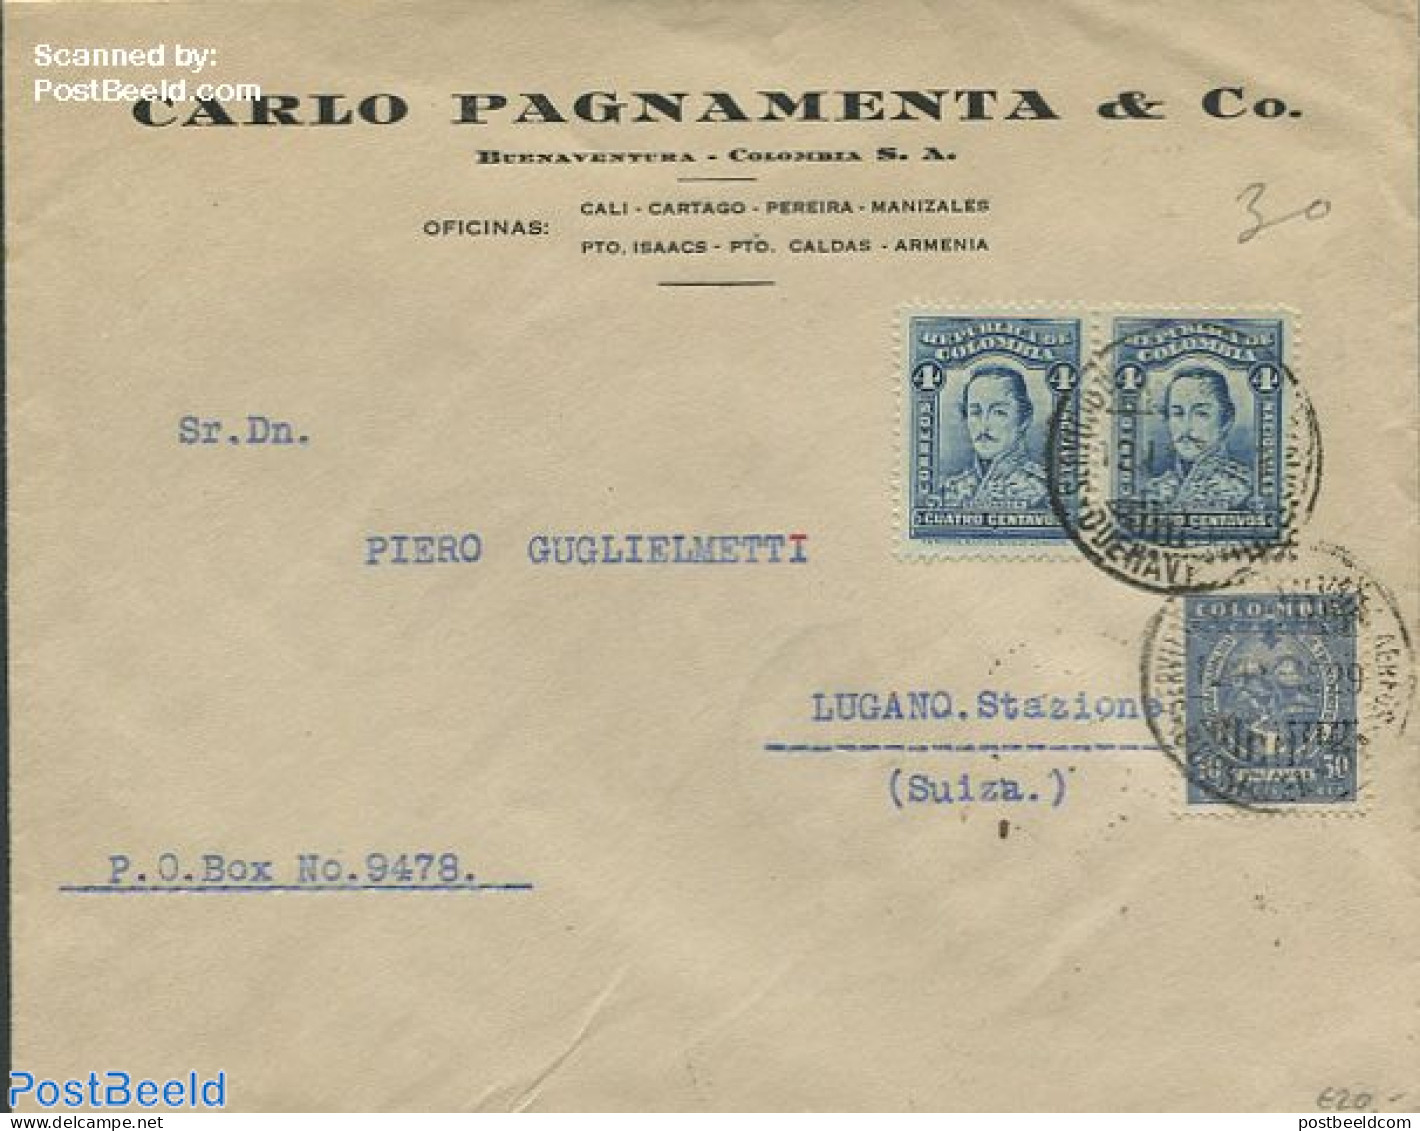 Colombia 1929 Envelope From Colombia To Switzerland, Postal History - Colombie